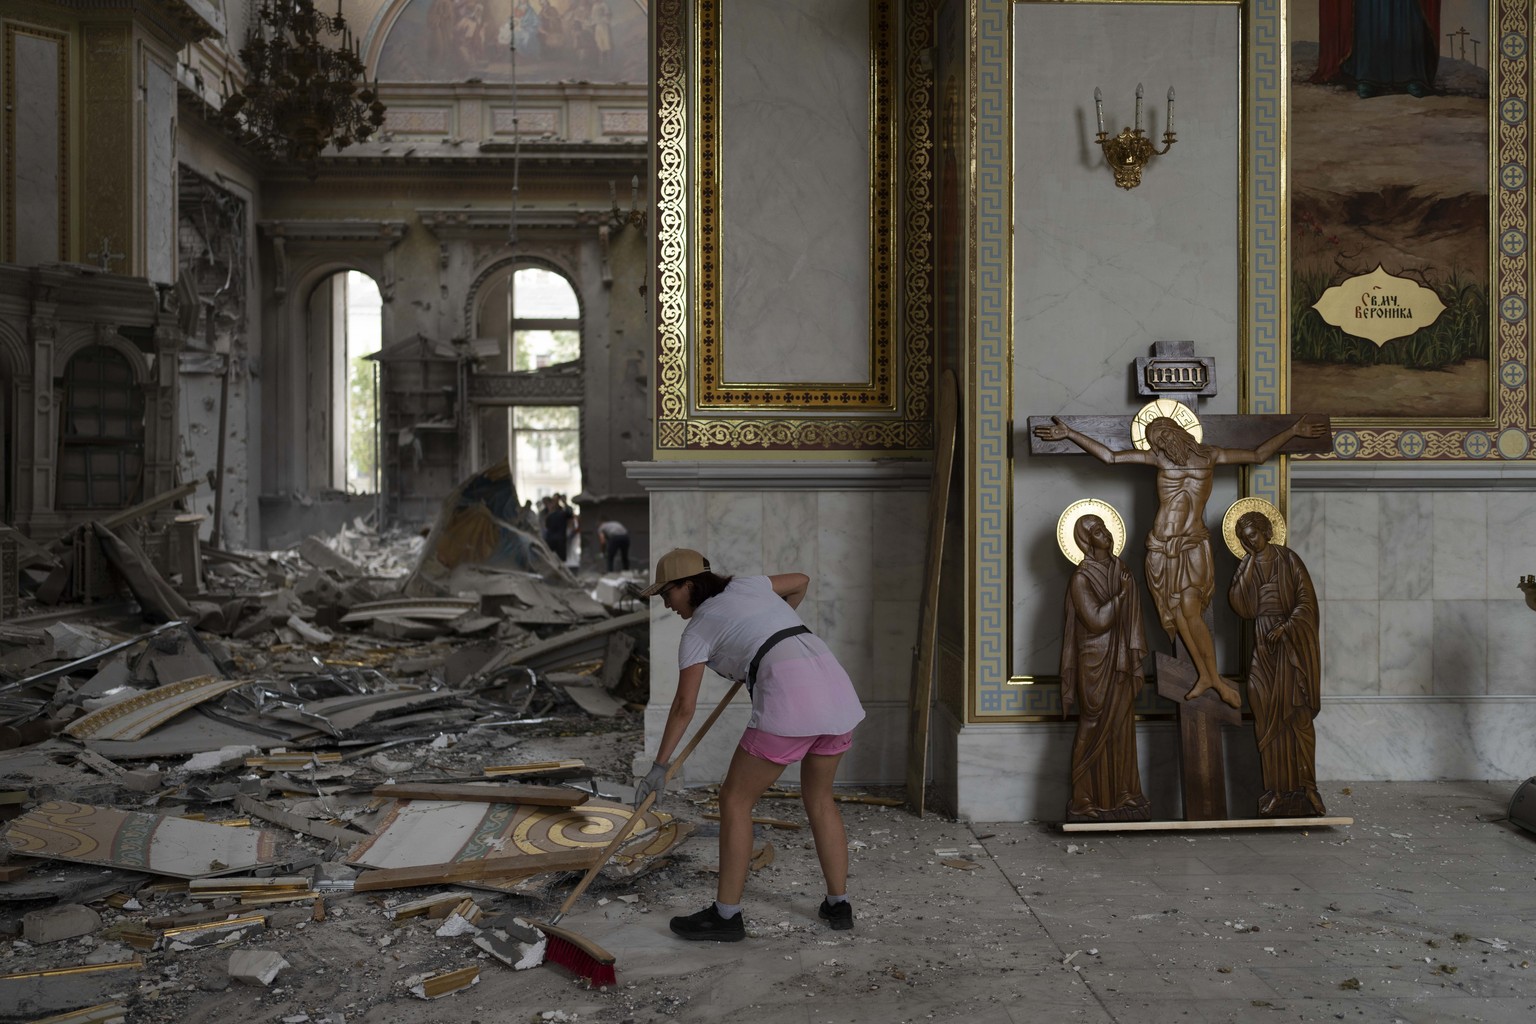 A woman helps clean up inside the Odesa Transfiguration Cathedral after it was heavily damaged in Russian missile attacks in Odesa, Ukraine, Sunday, July 23, 2023. (AP Photo/Jae C. Hong)